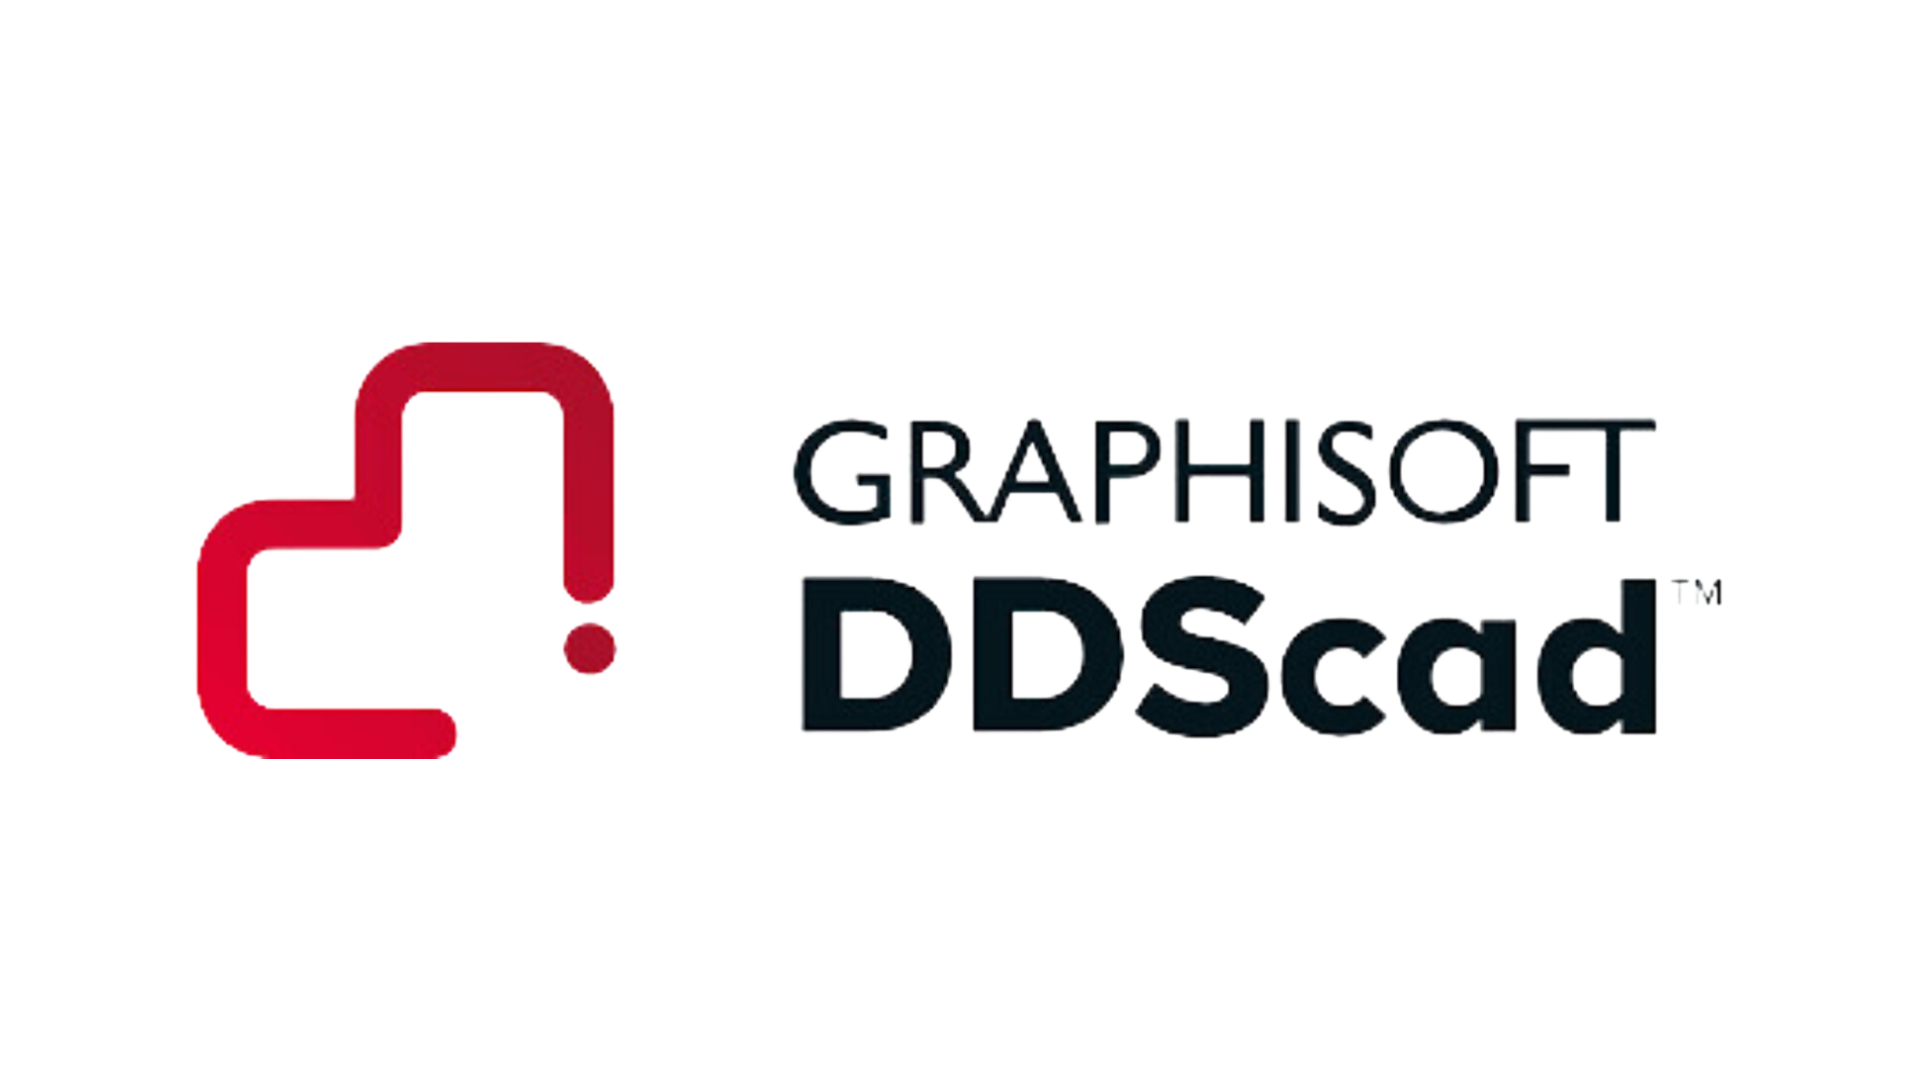 Logo of Graphisoft DDScad - a design tool integrating with Catenda Hub